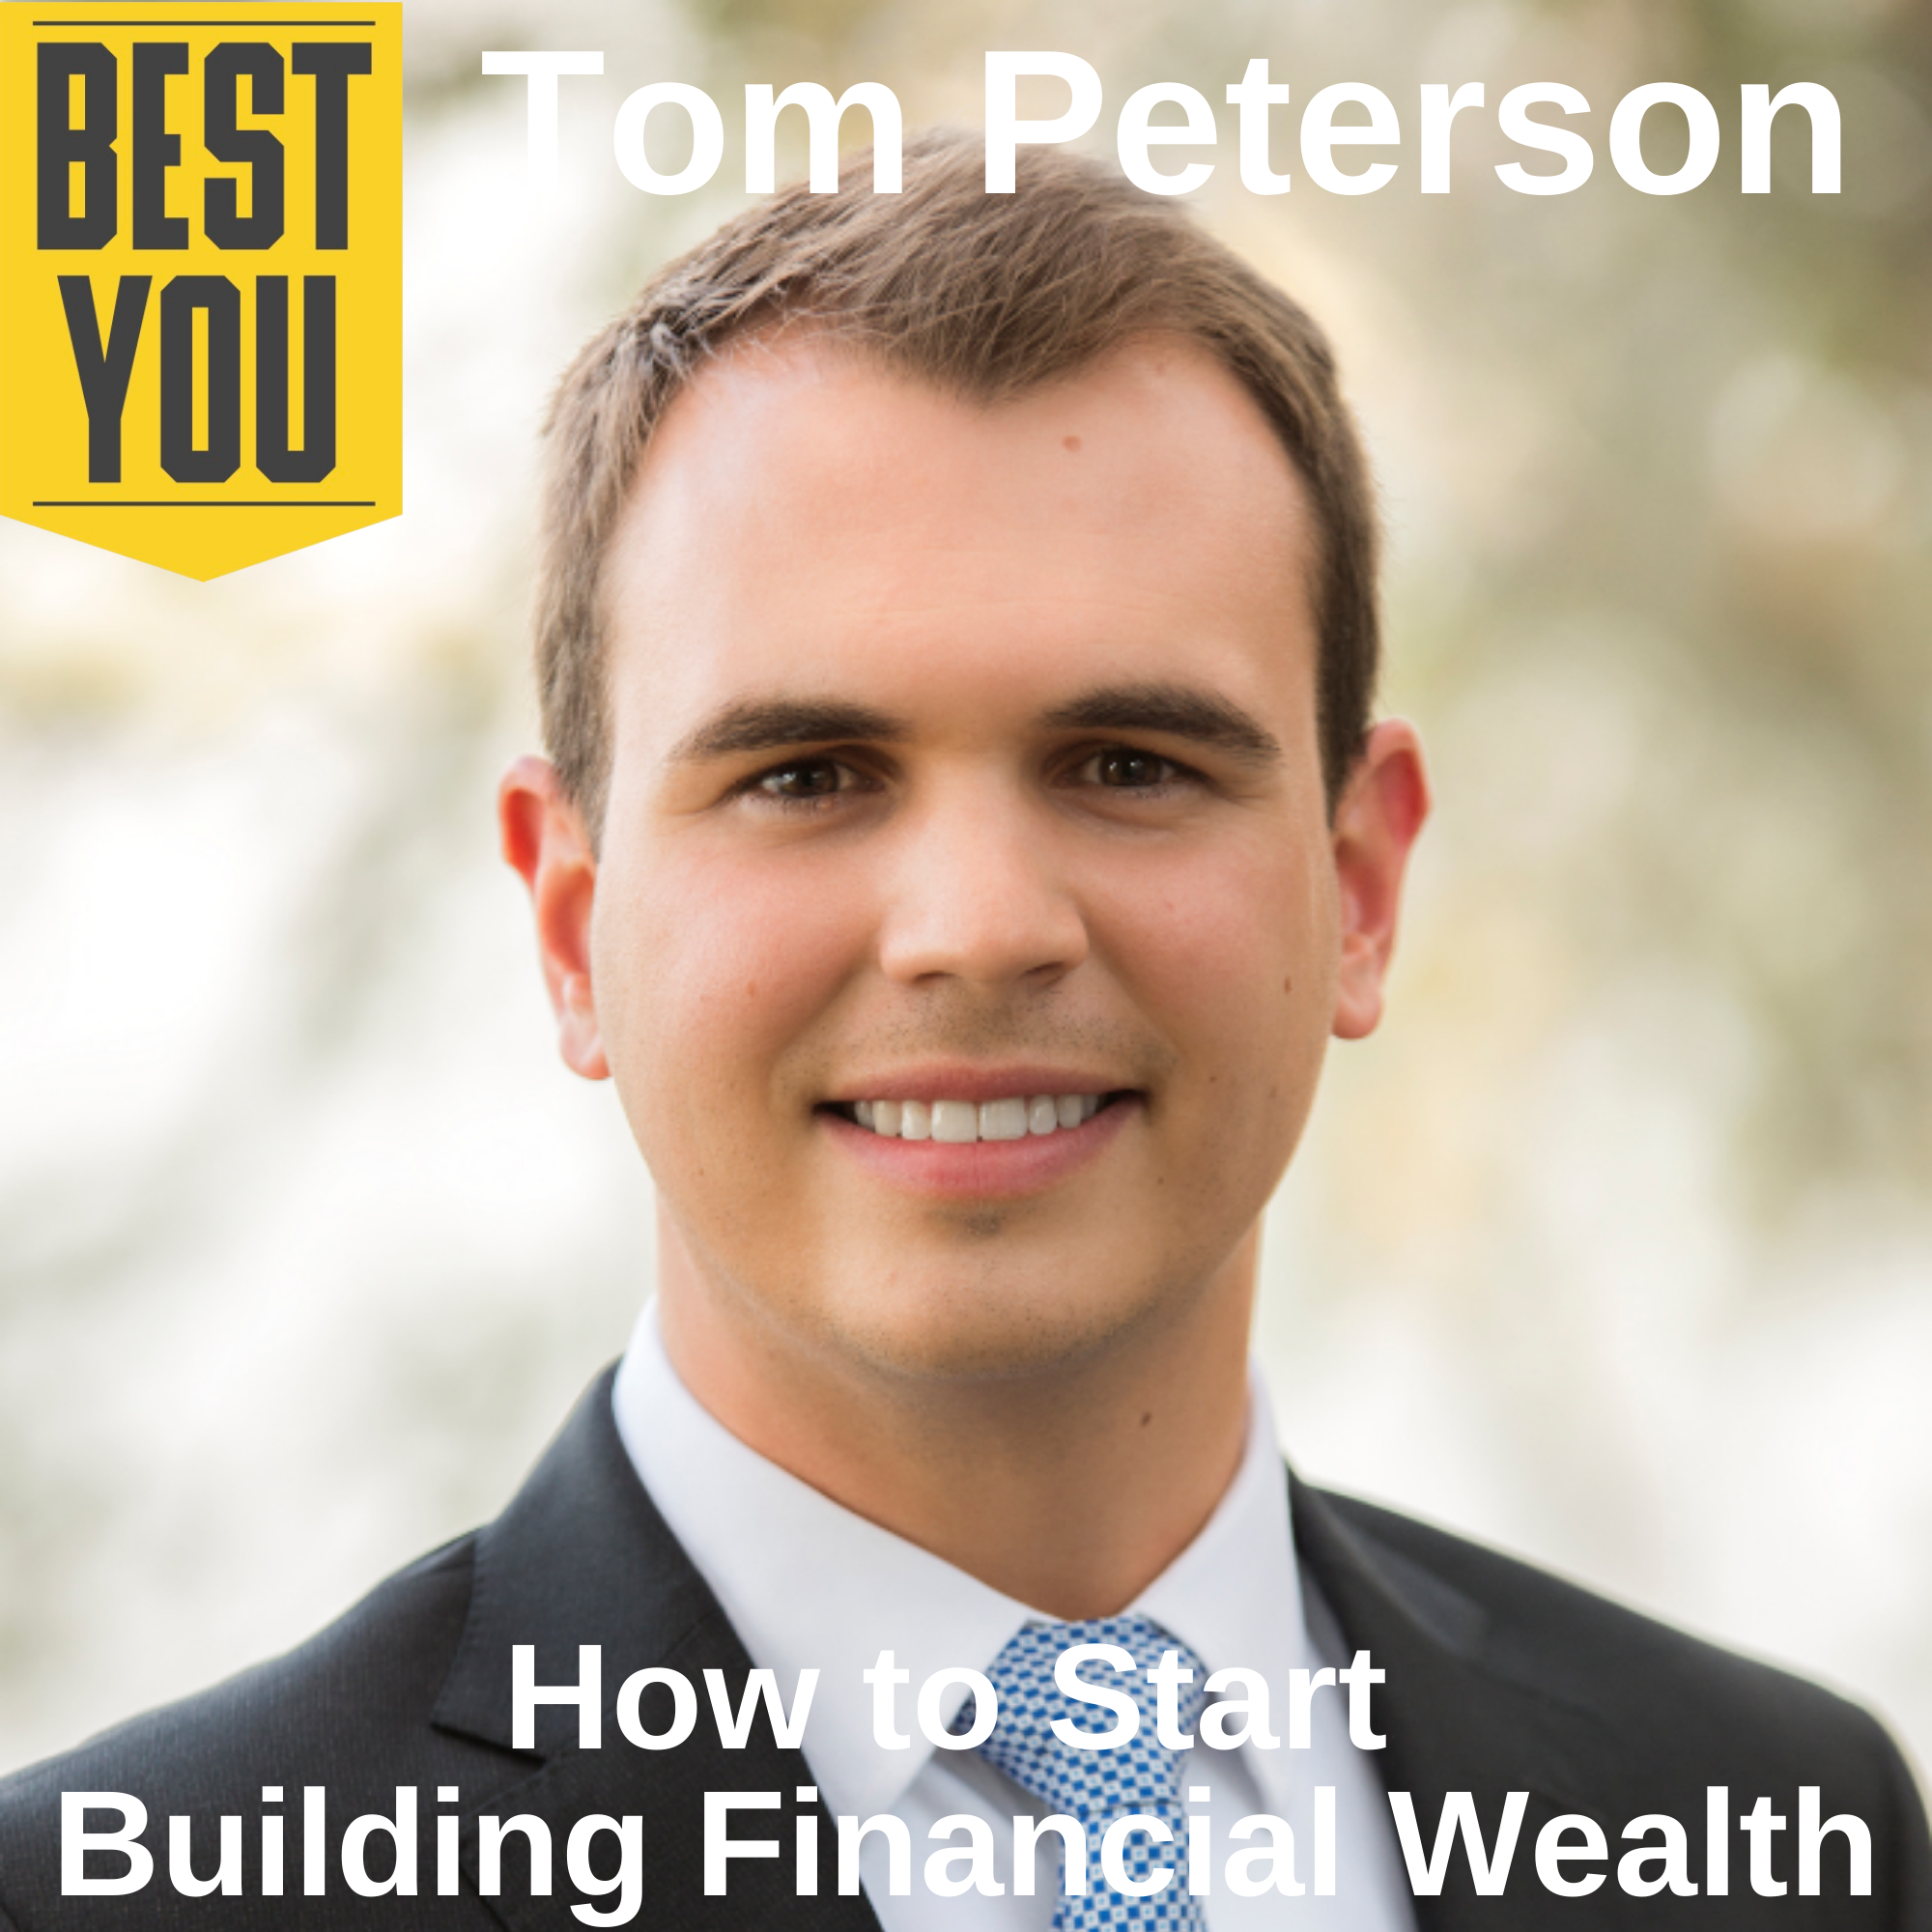 187. Tom Peterson - How to Start Building Financial Wealth